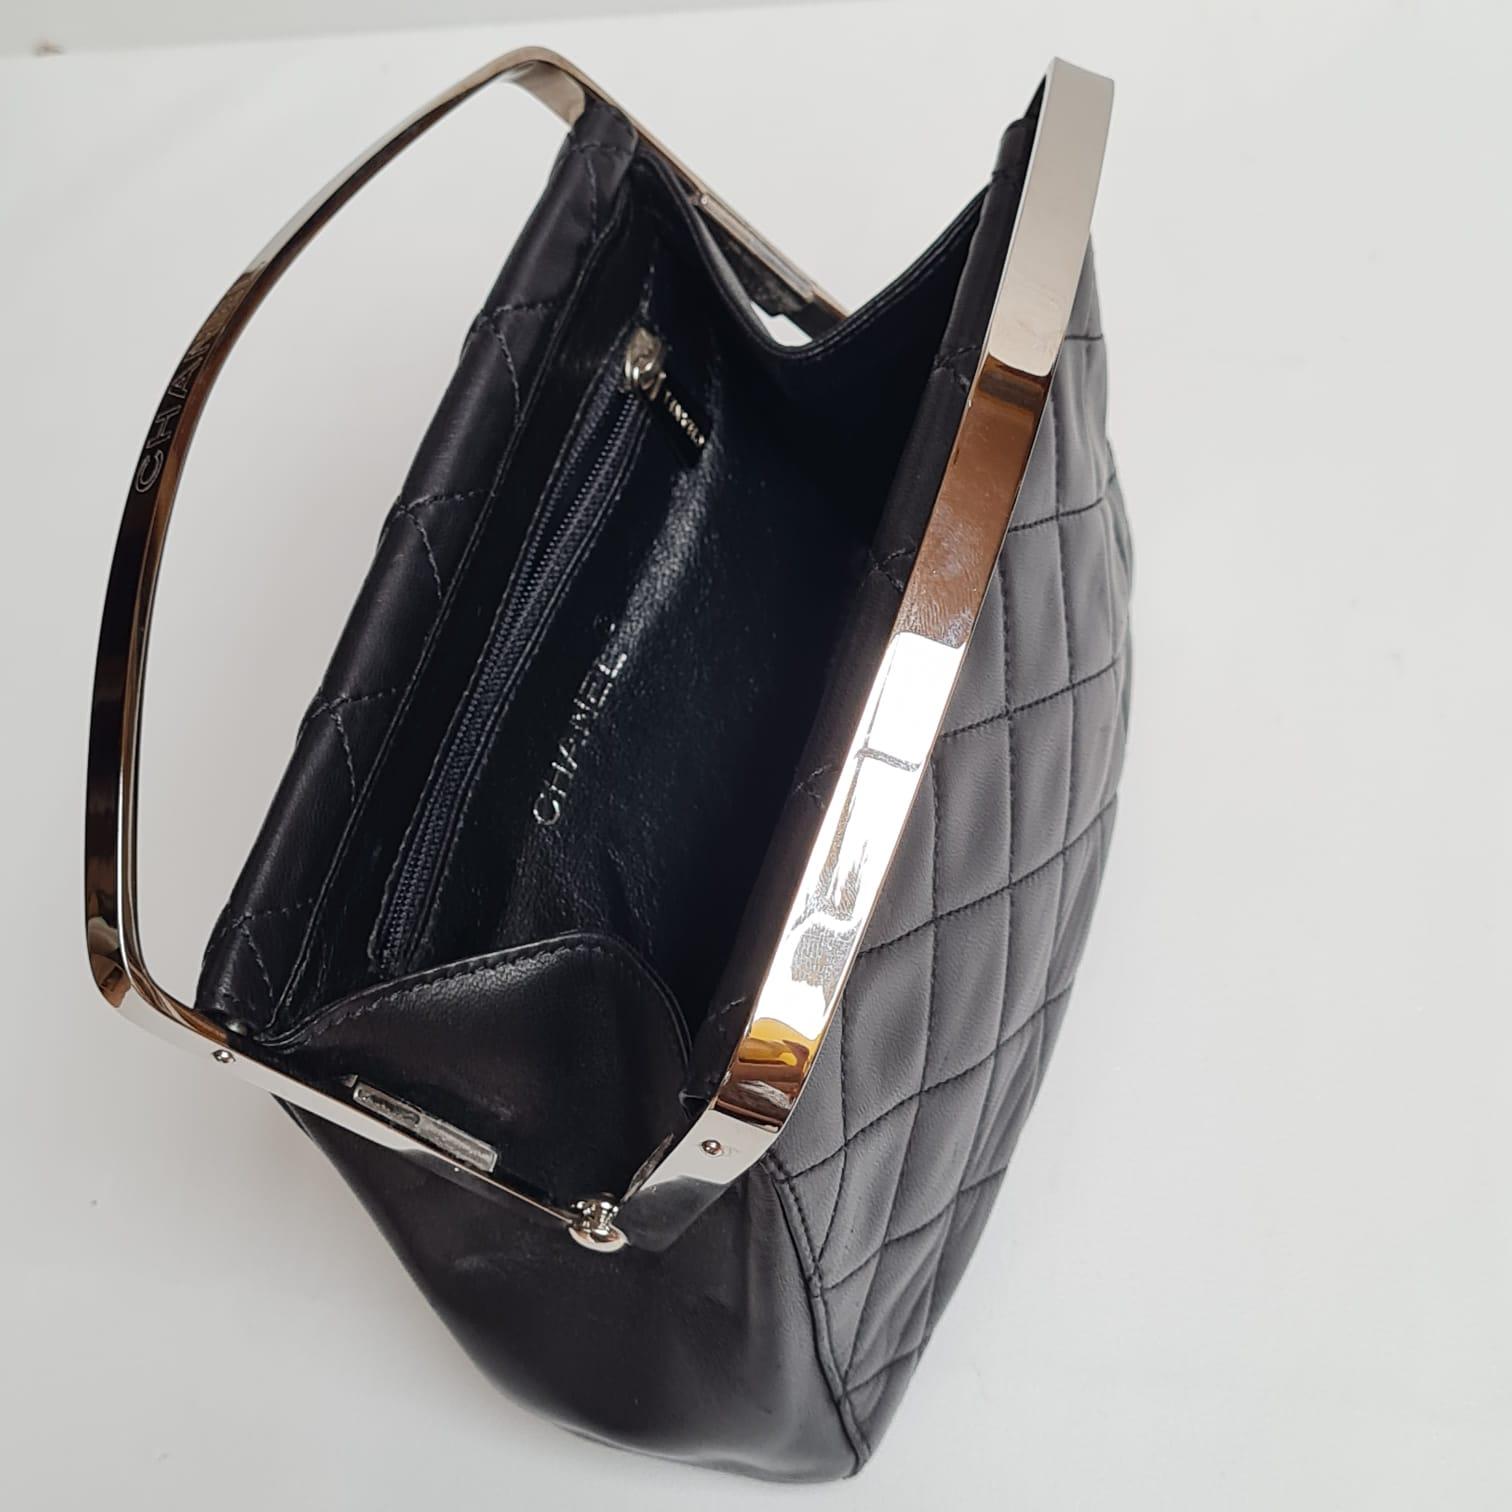 Vintage Chanel Black Lambskin Quilted Small Magnetic Frame Top Handle Bag In Good Condition For Sale In Jakarta, Daerah Khusus Ibukota Jakarta